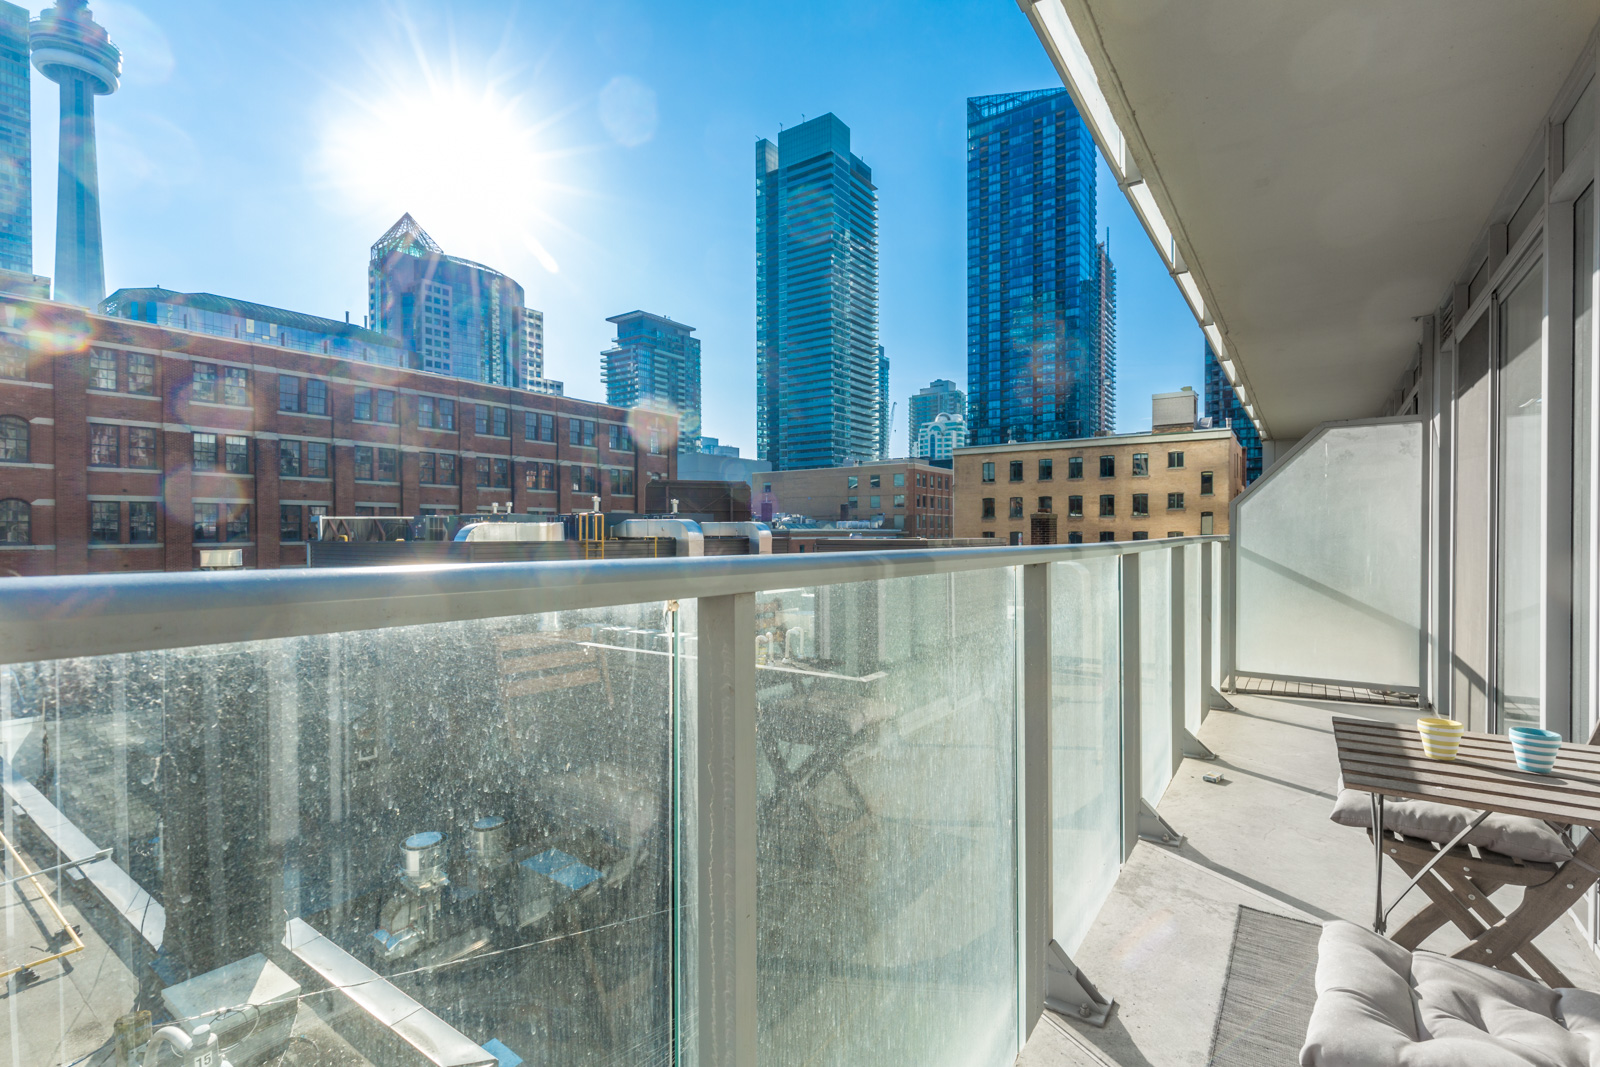 Photo of Toronto condo showing spacious balcony and view of CN Tower